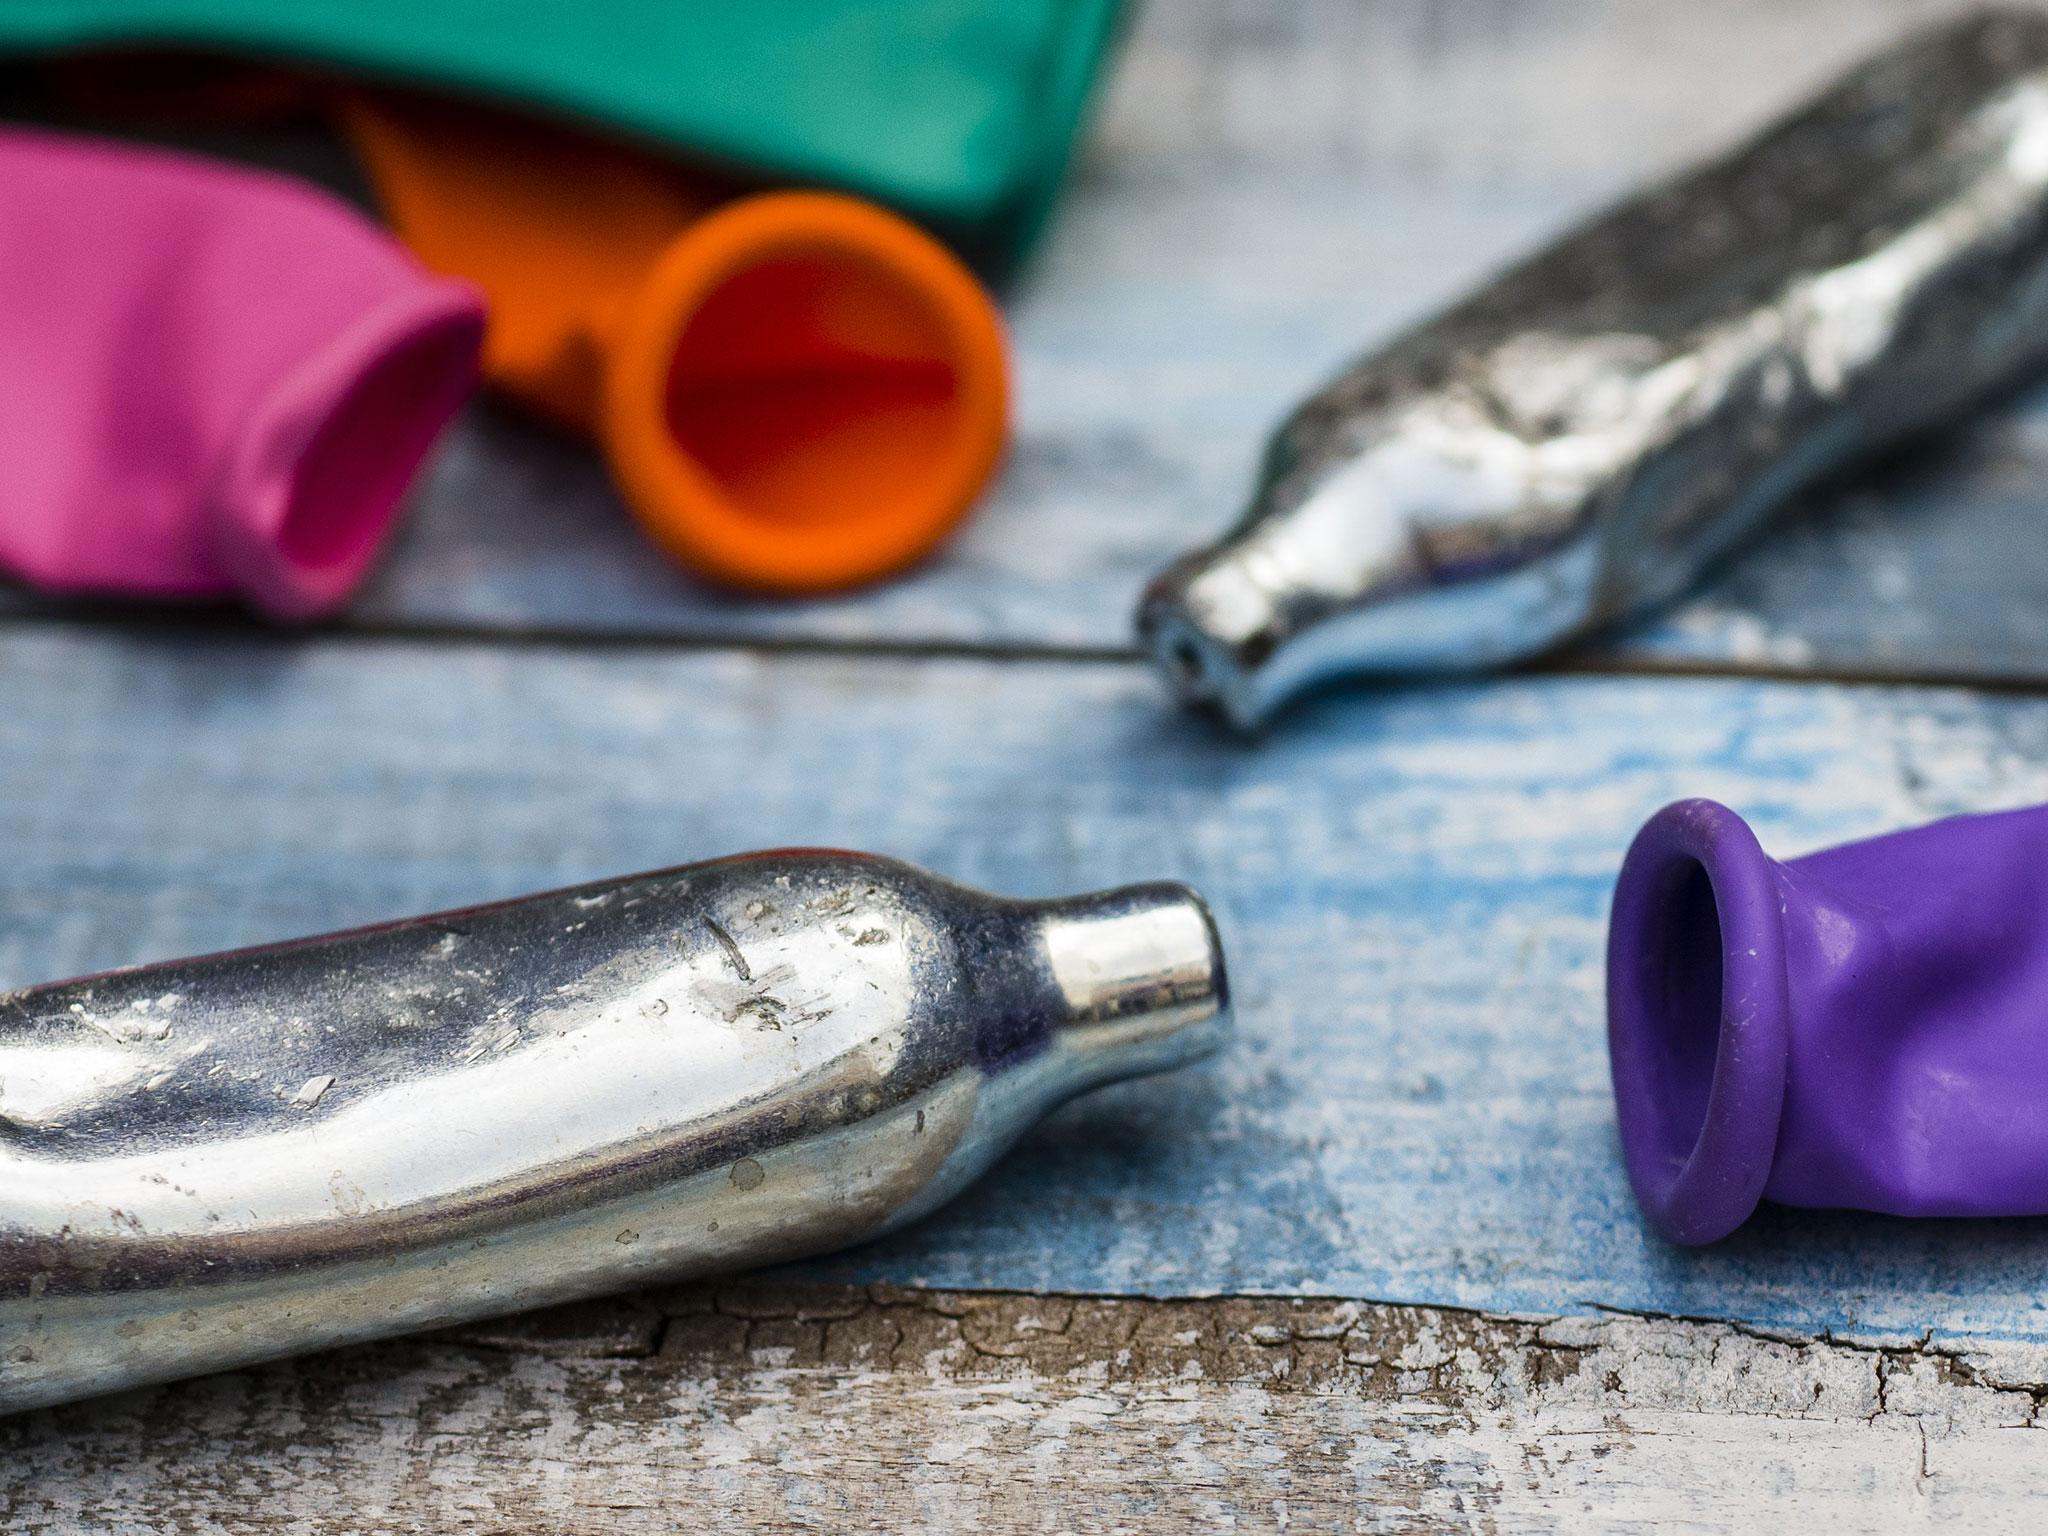 Laughing gas, or nitrous oxide, use is increasingly popular among younger people